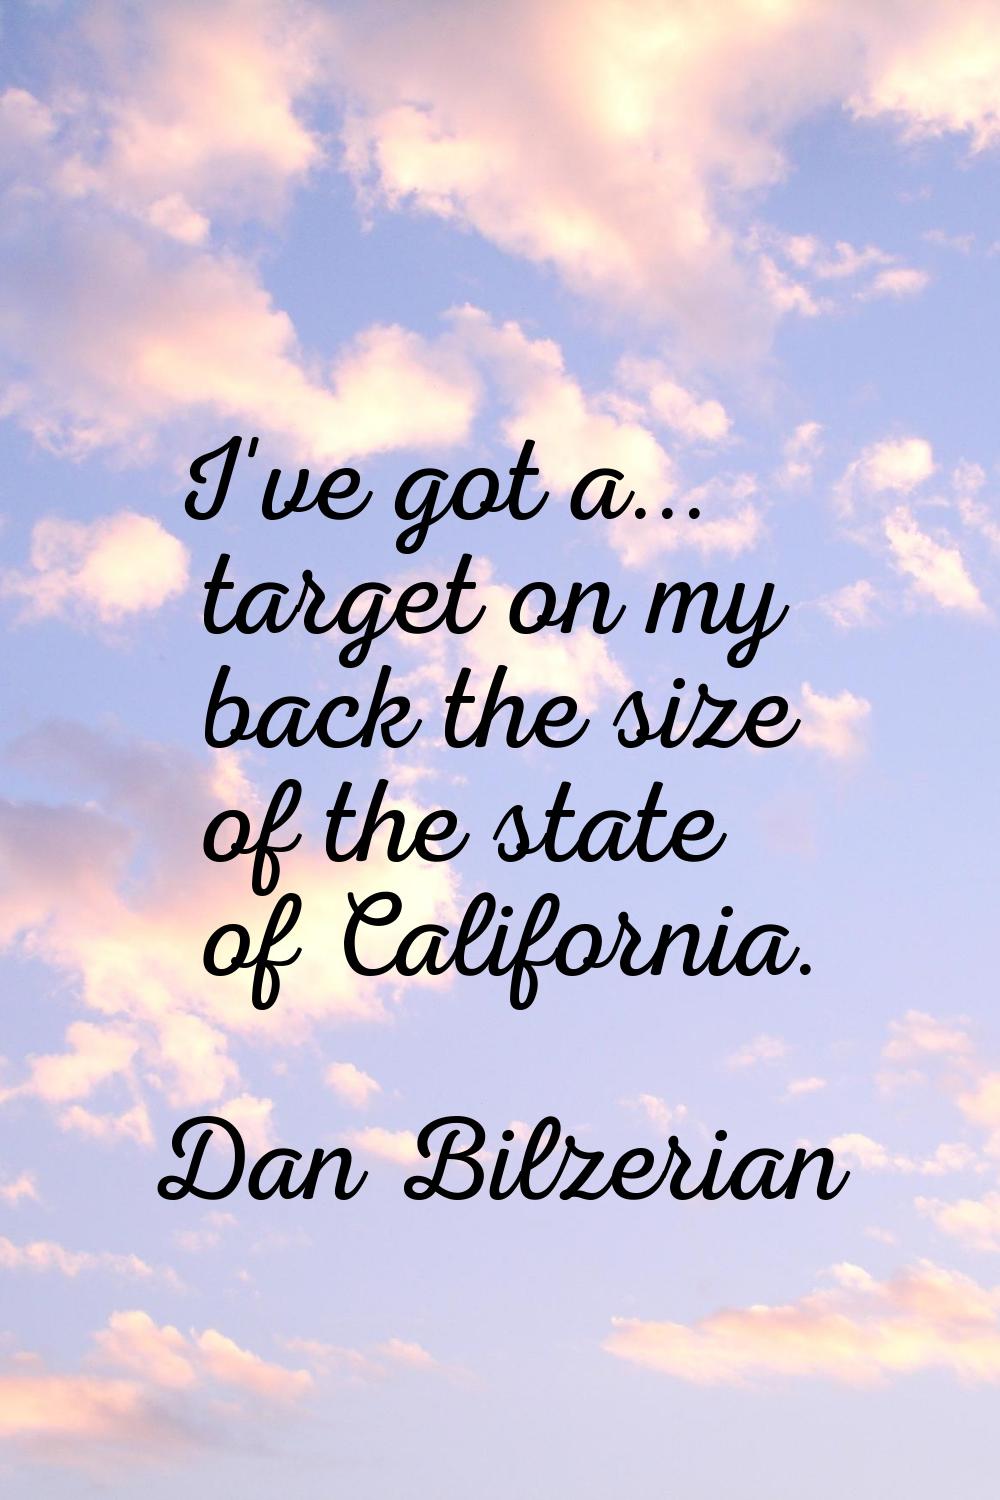 I've got a... target on my back the size of the state of California.